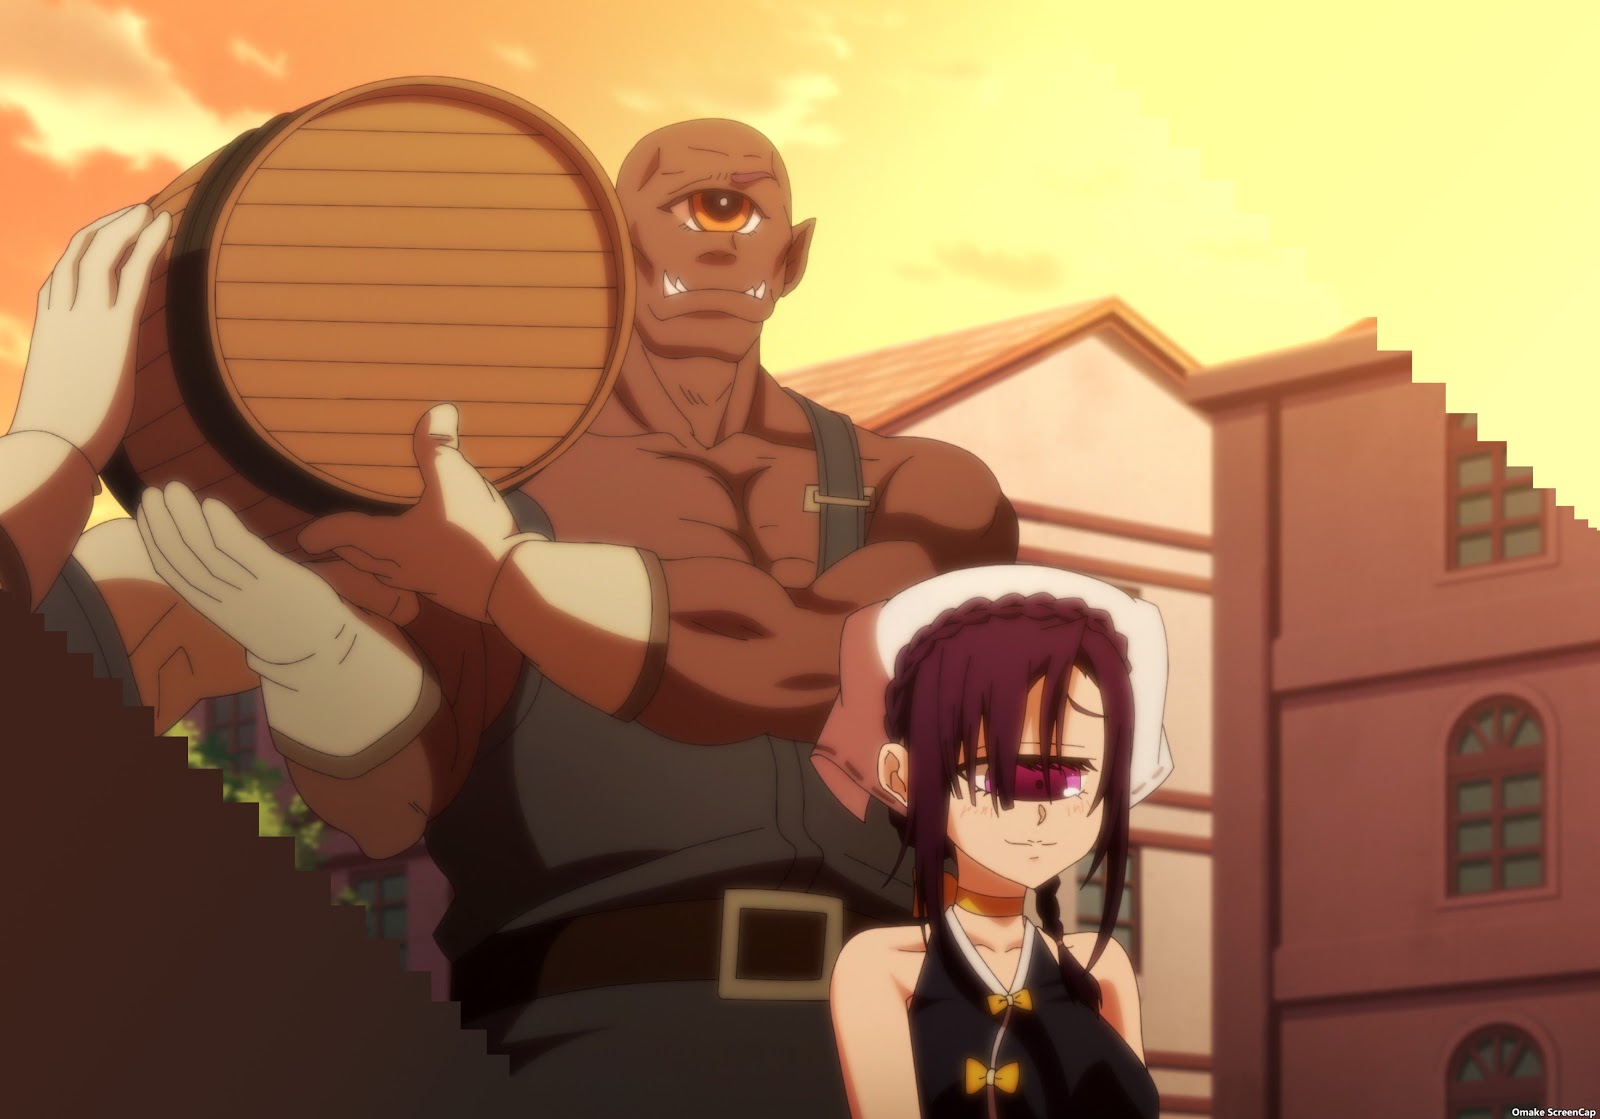 Monster Musume no Oisha-san - Episode 12 discussion - FINAL : r/anime